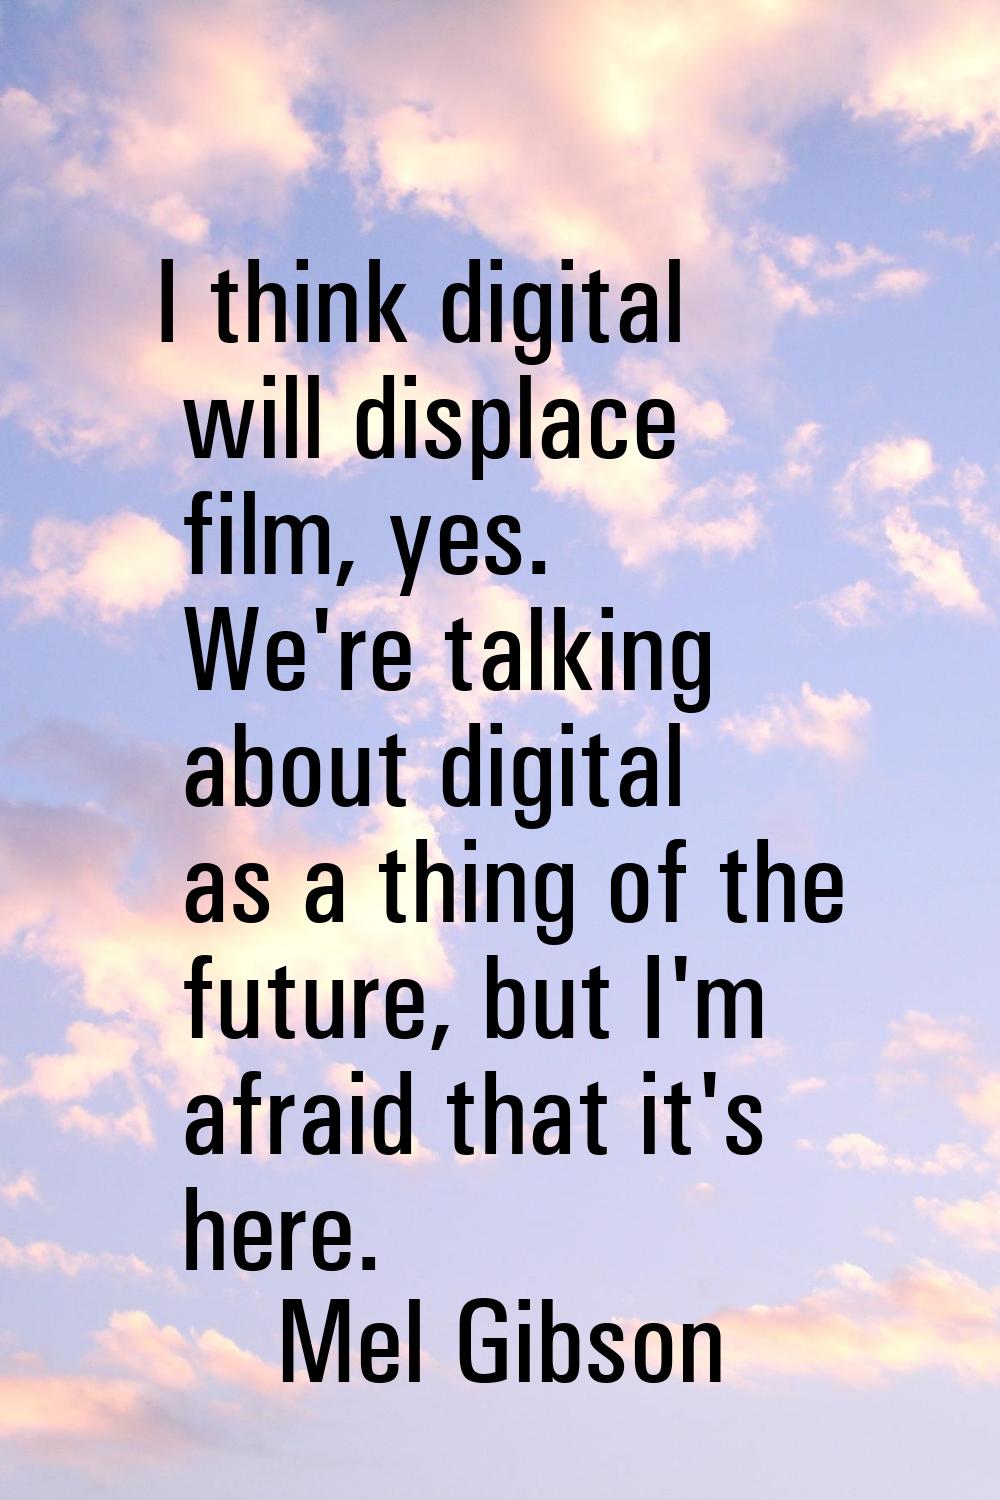 I think digital will displace film, yes. We're talking about digital as a thing of the future, but 